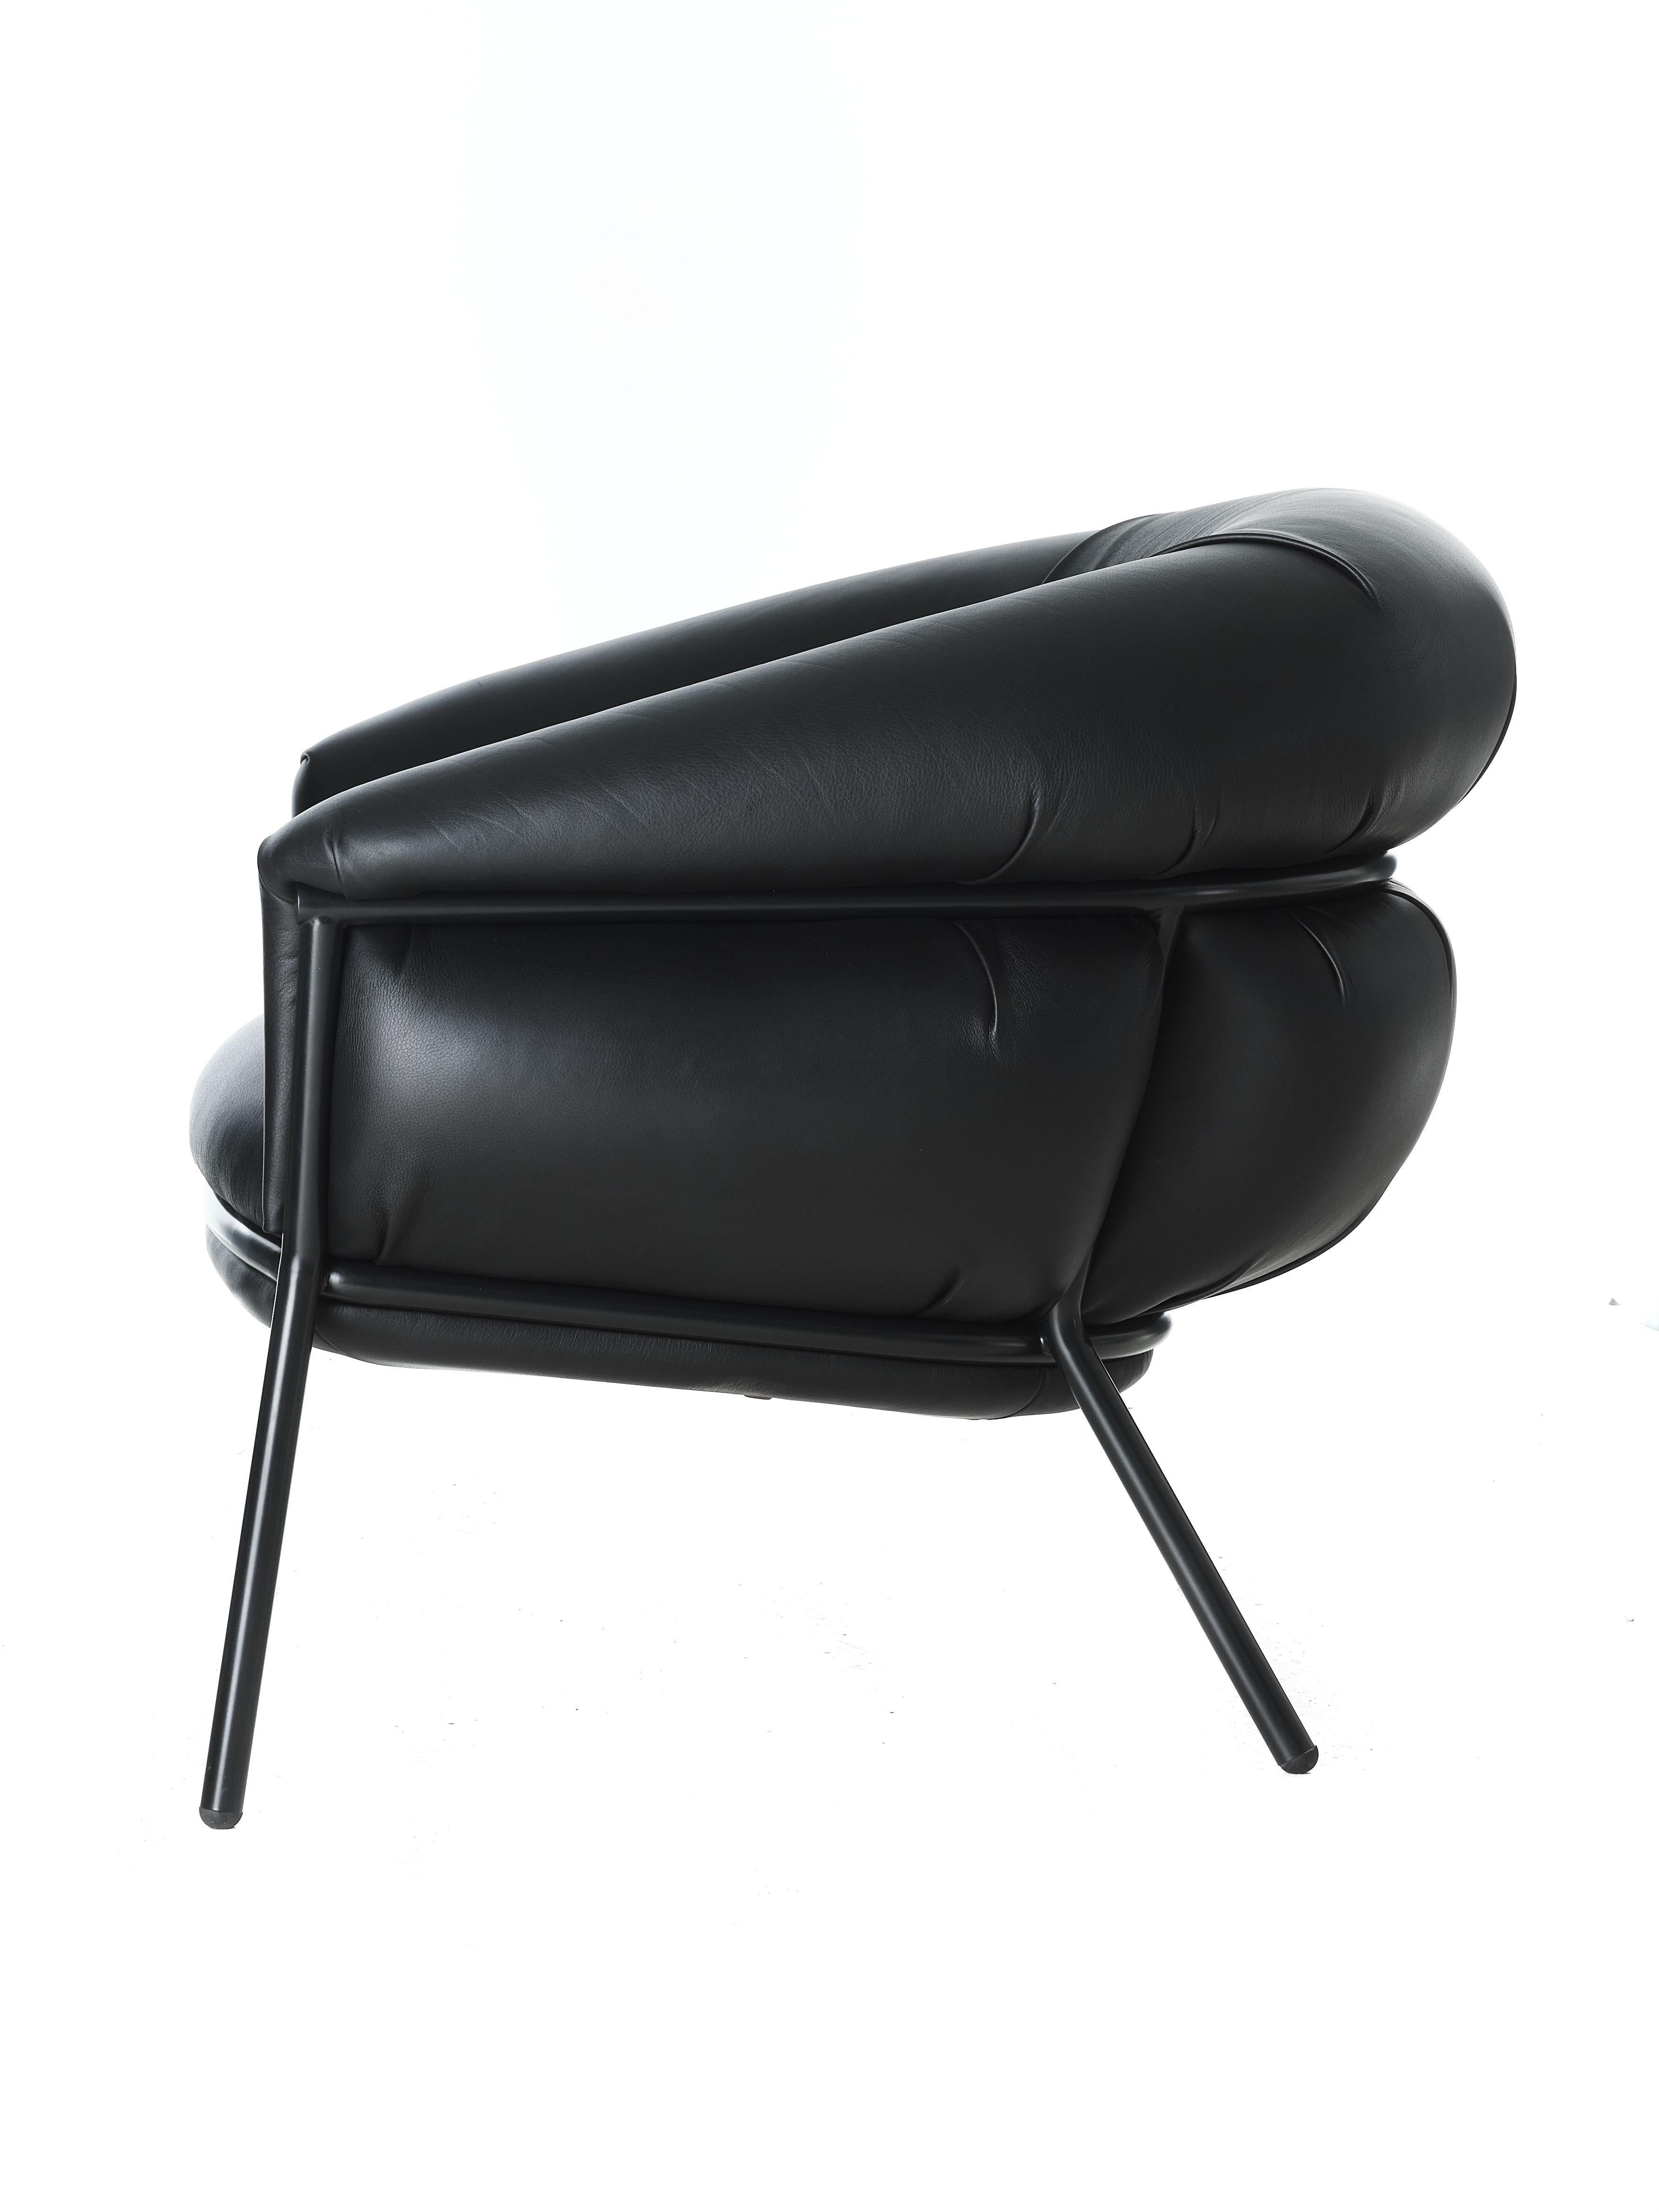 Painted Grasso Armchair by Stephen Burks black padded leather upholstery black structure For Sale